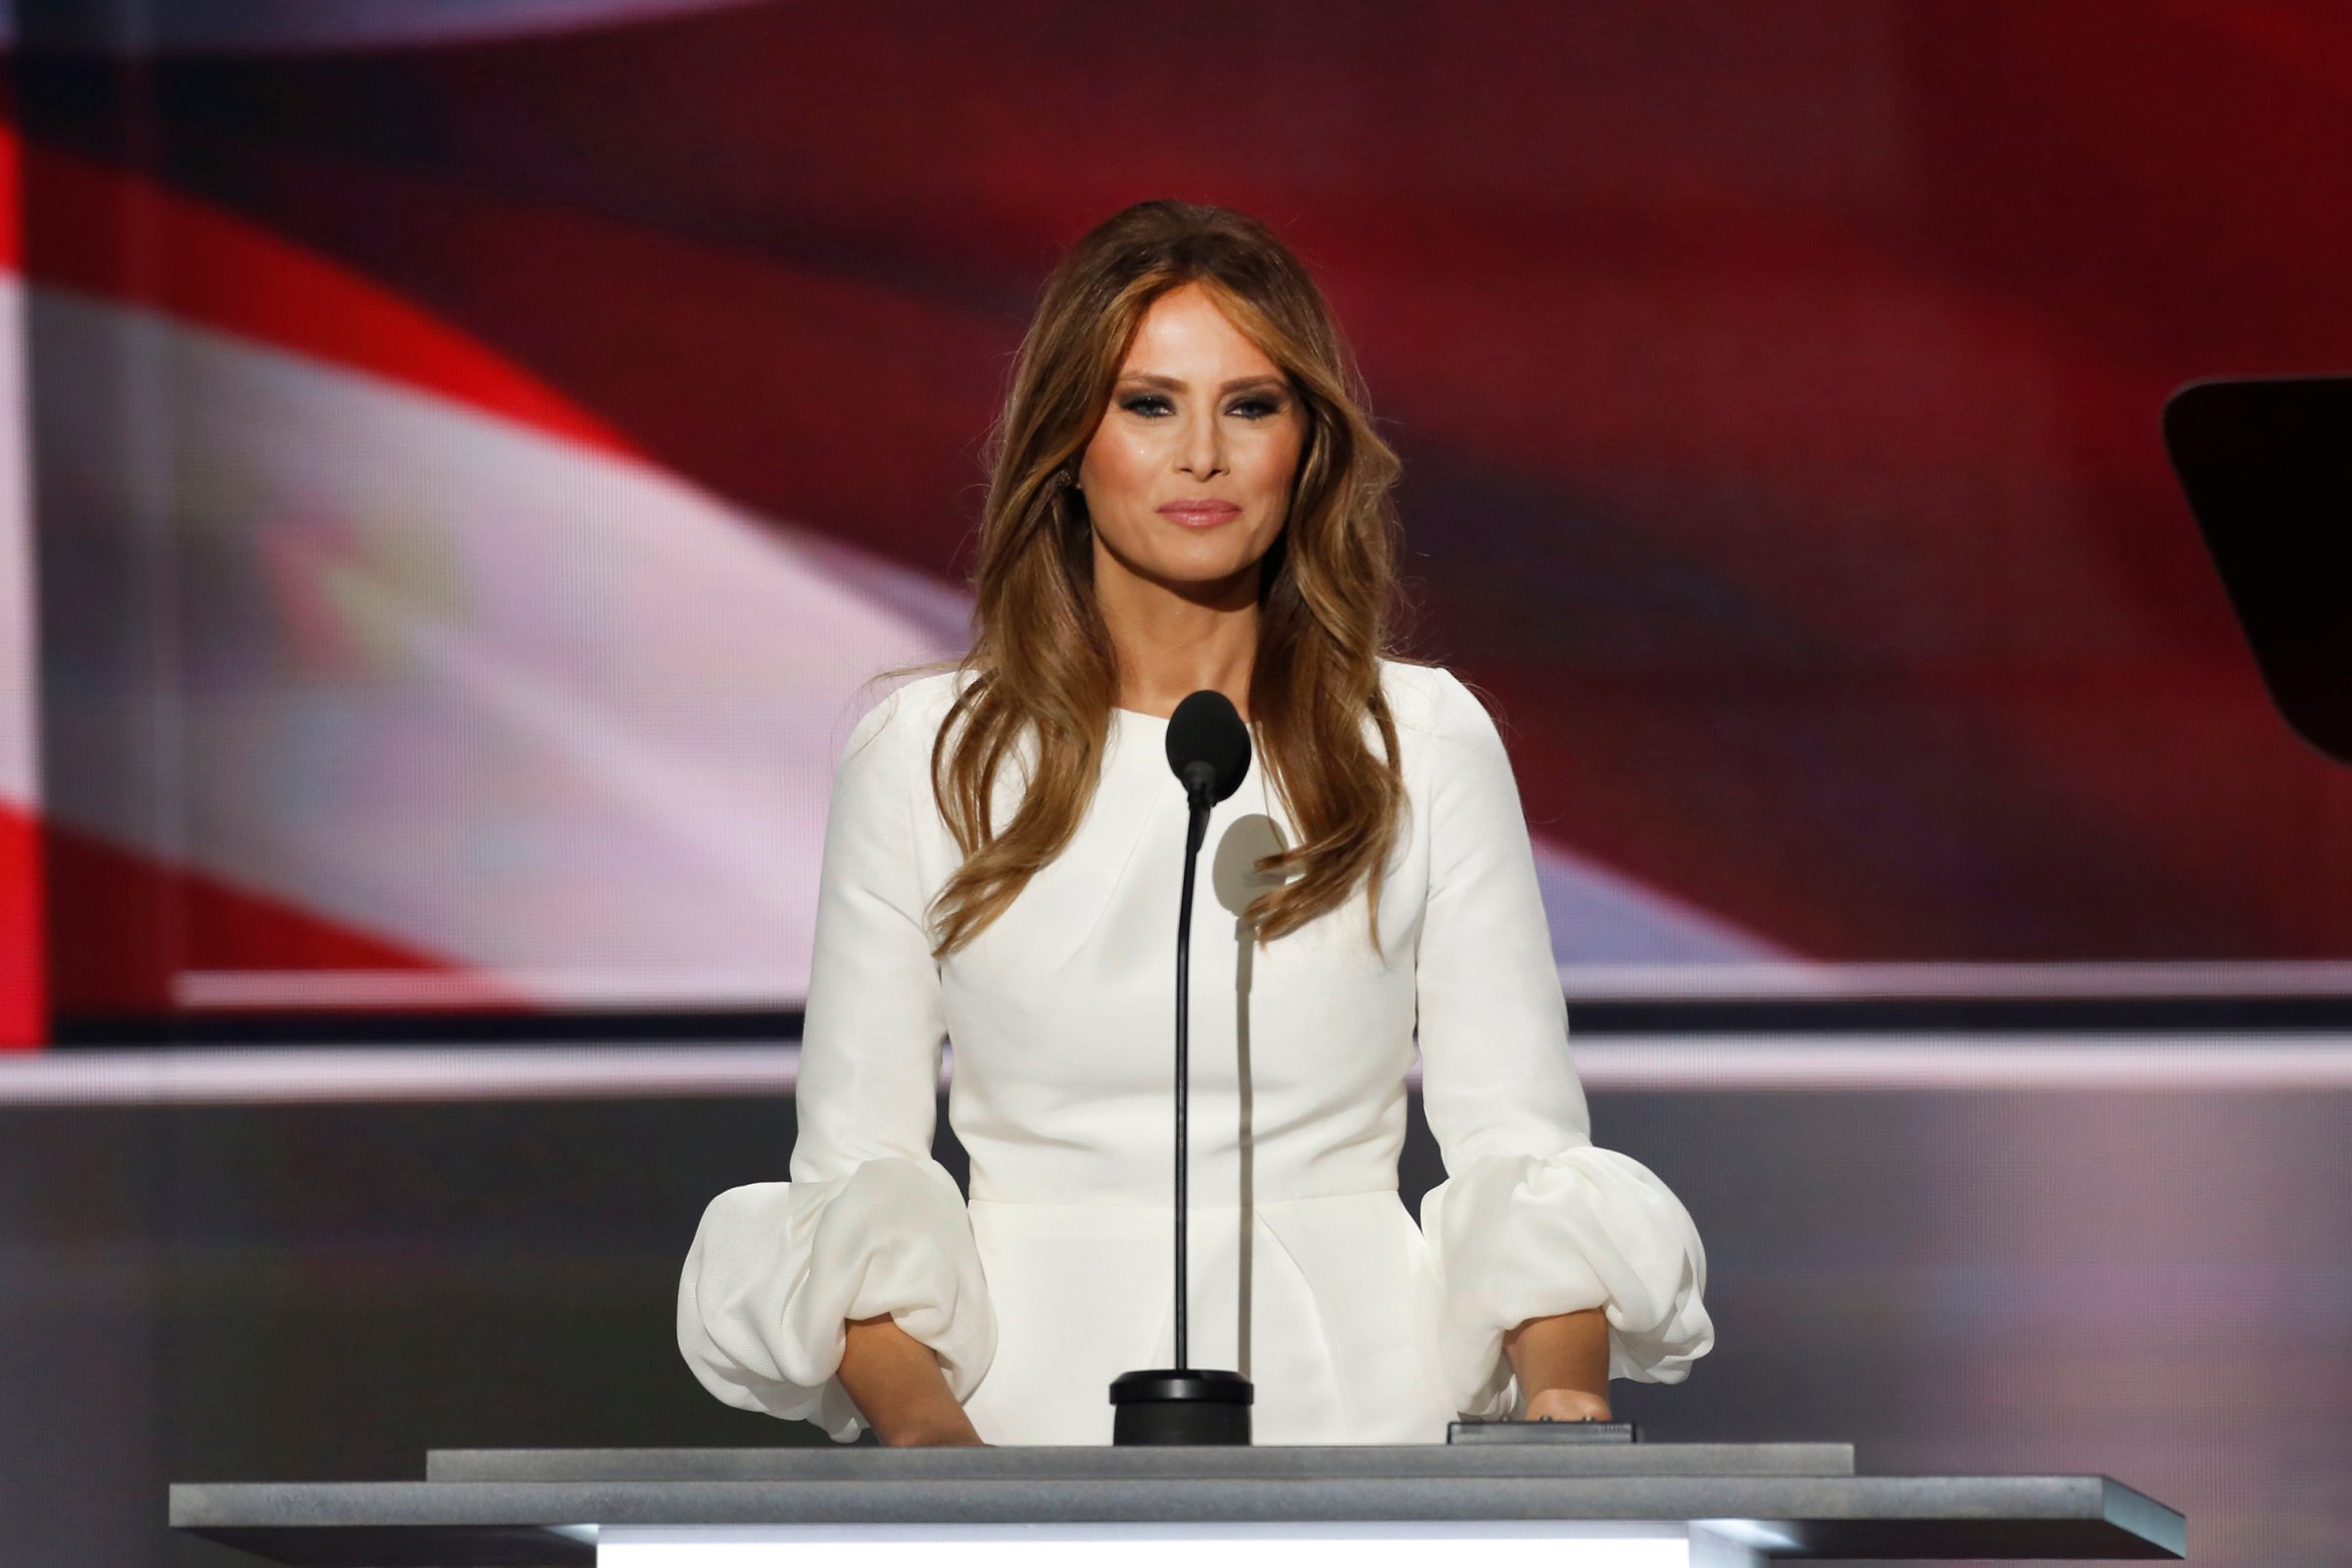 Melania Trump speaks during the Republican National Convention in Cleveland, Ohio, on July 18, 2016.